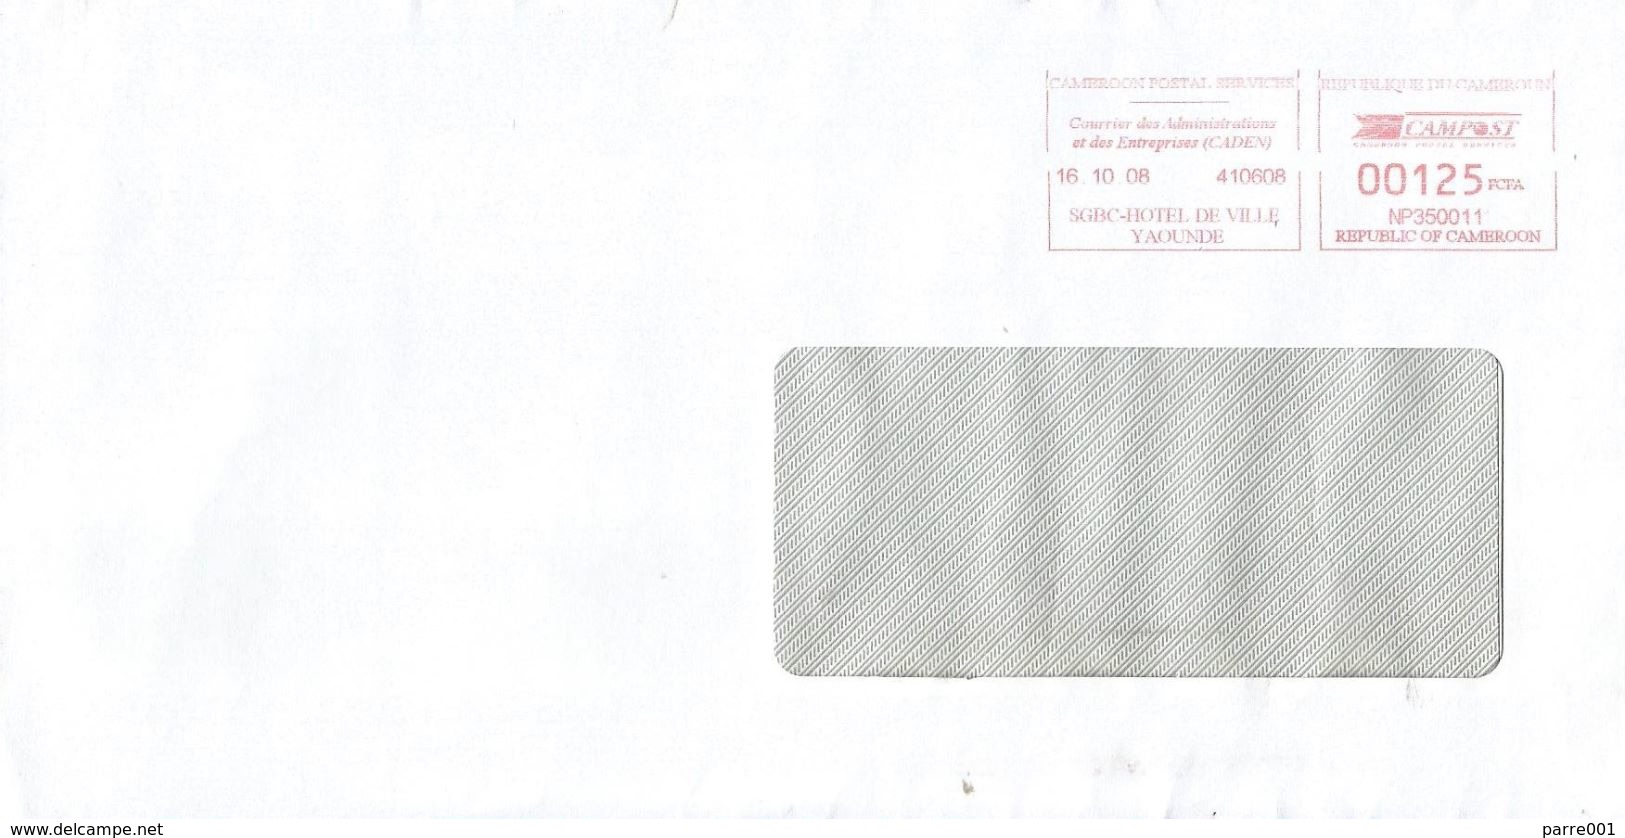 Cameroun Cameroon 2008 SGBC Bank Yaounde NP350011 Neopost Meter Franking Cover - Cameroon (1960-...)